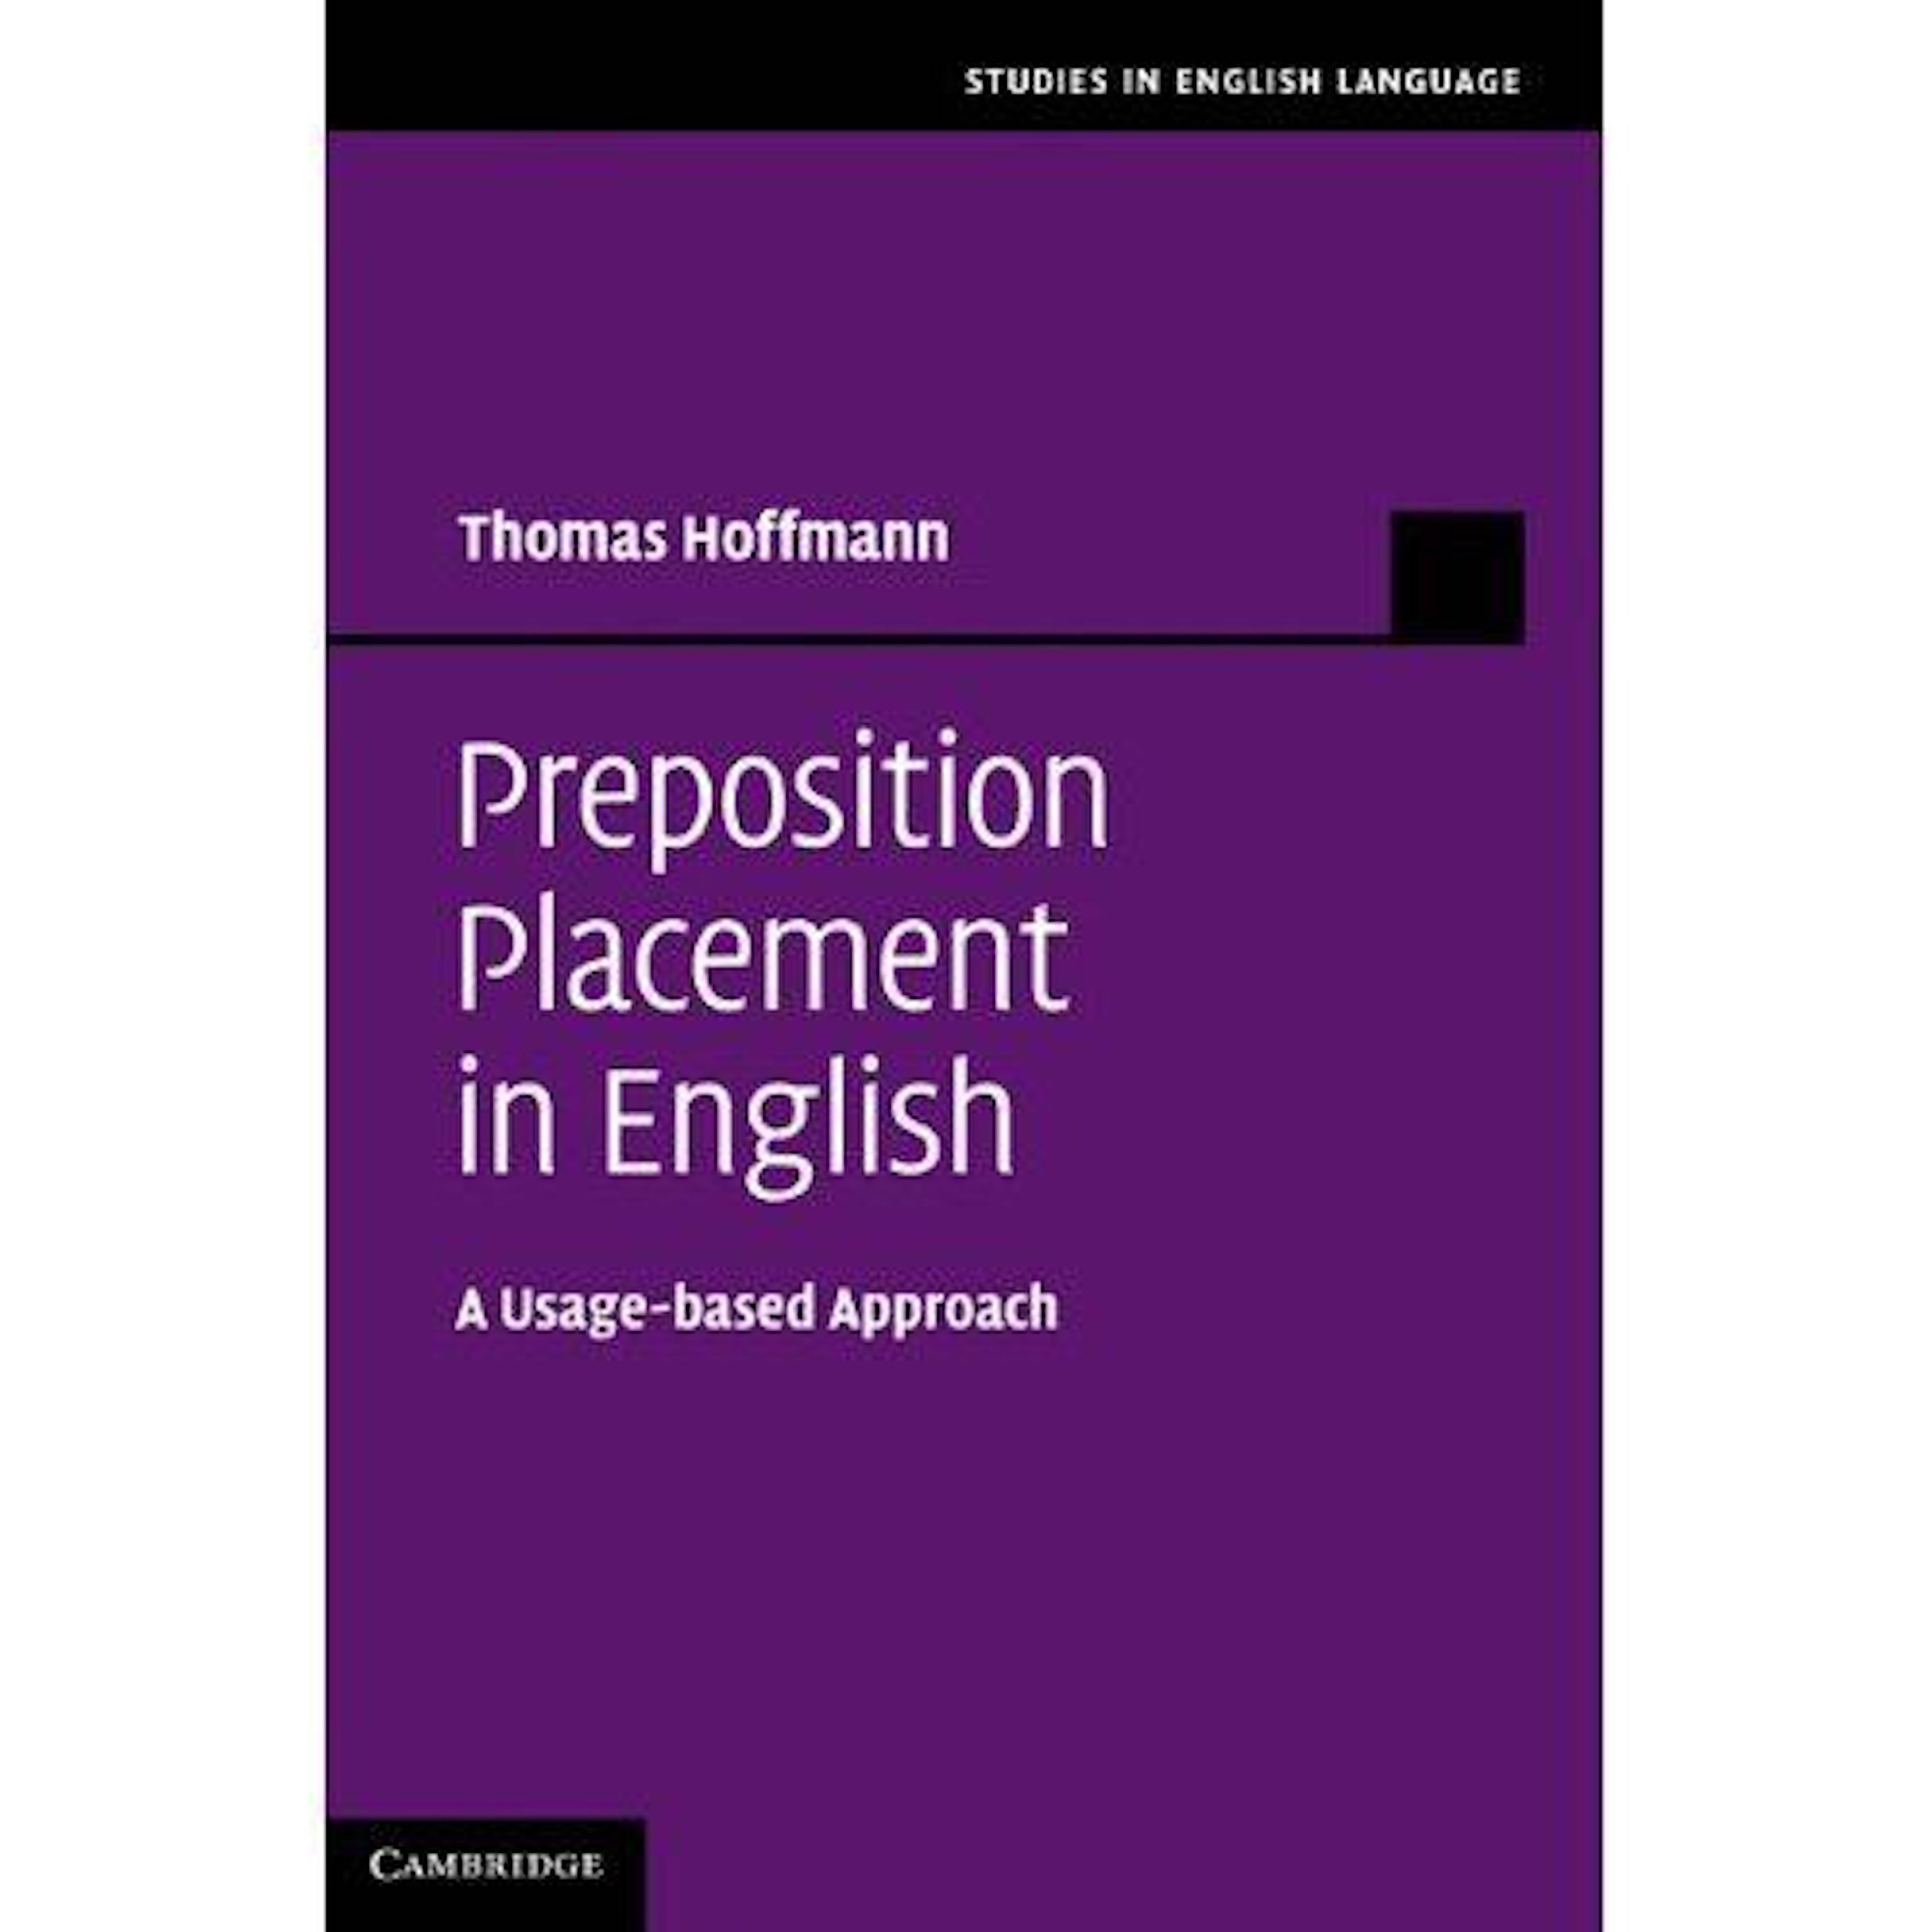 Preposition Placement in English. A Usage-based Approach